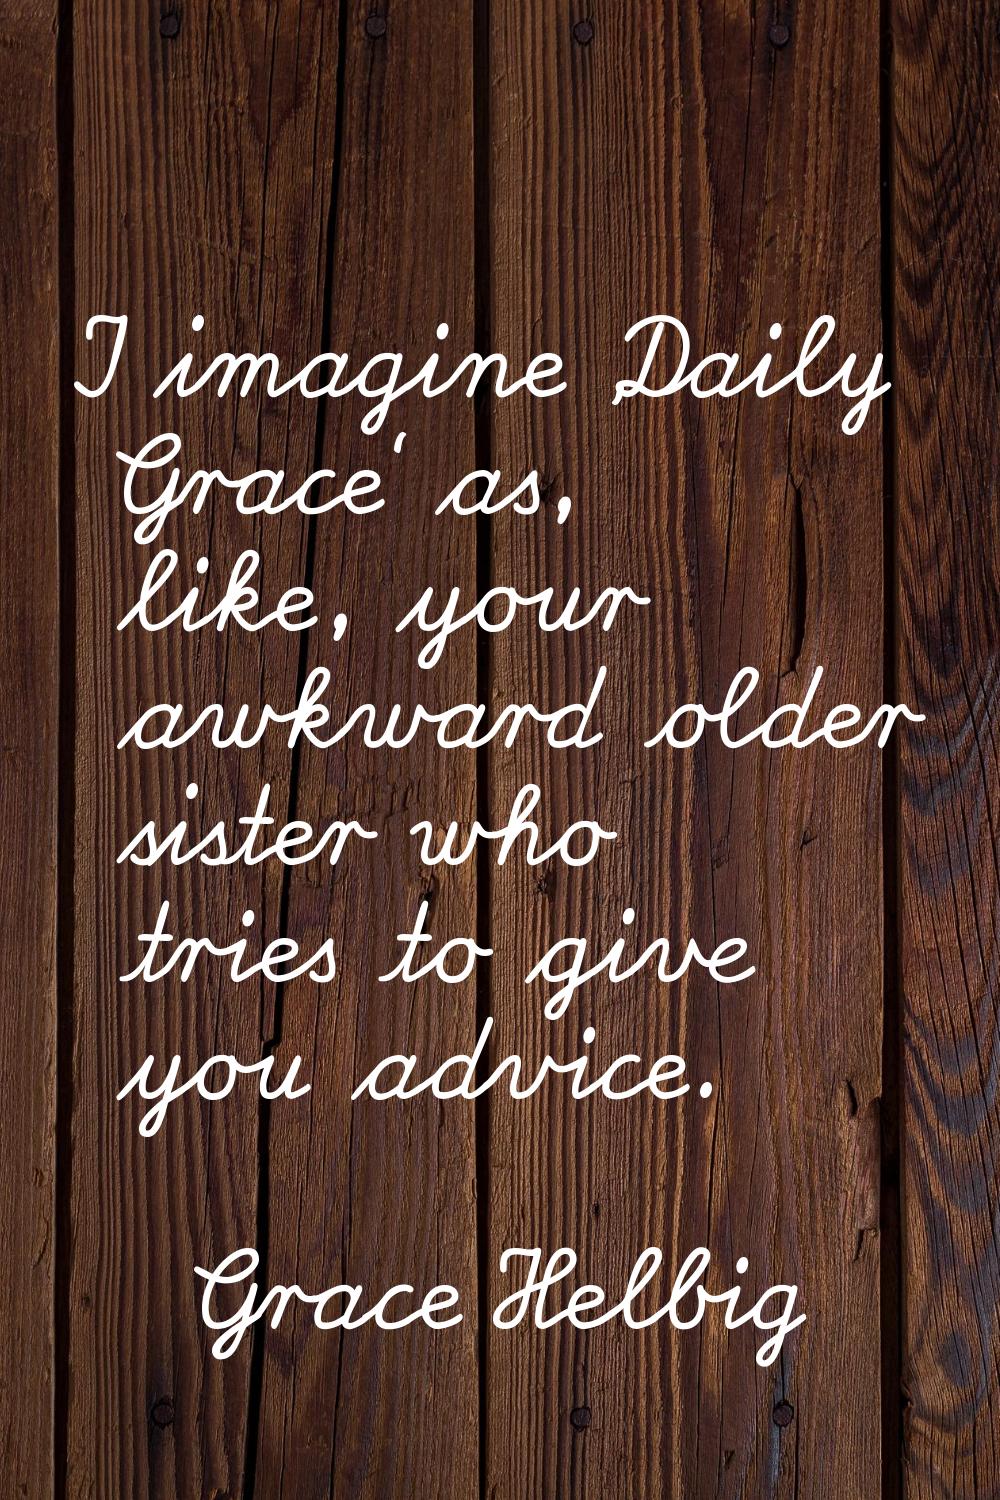 I imagine 'Daily Grace' as, like, your awkward older sister who tries to give you advice.